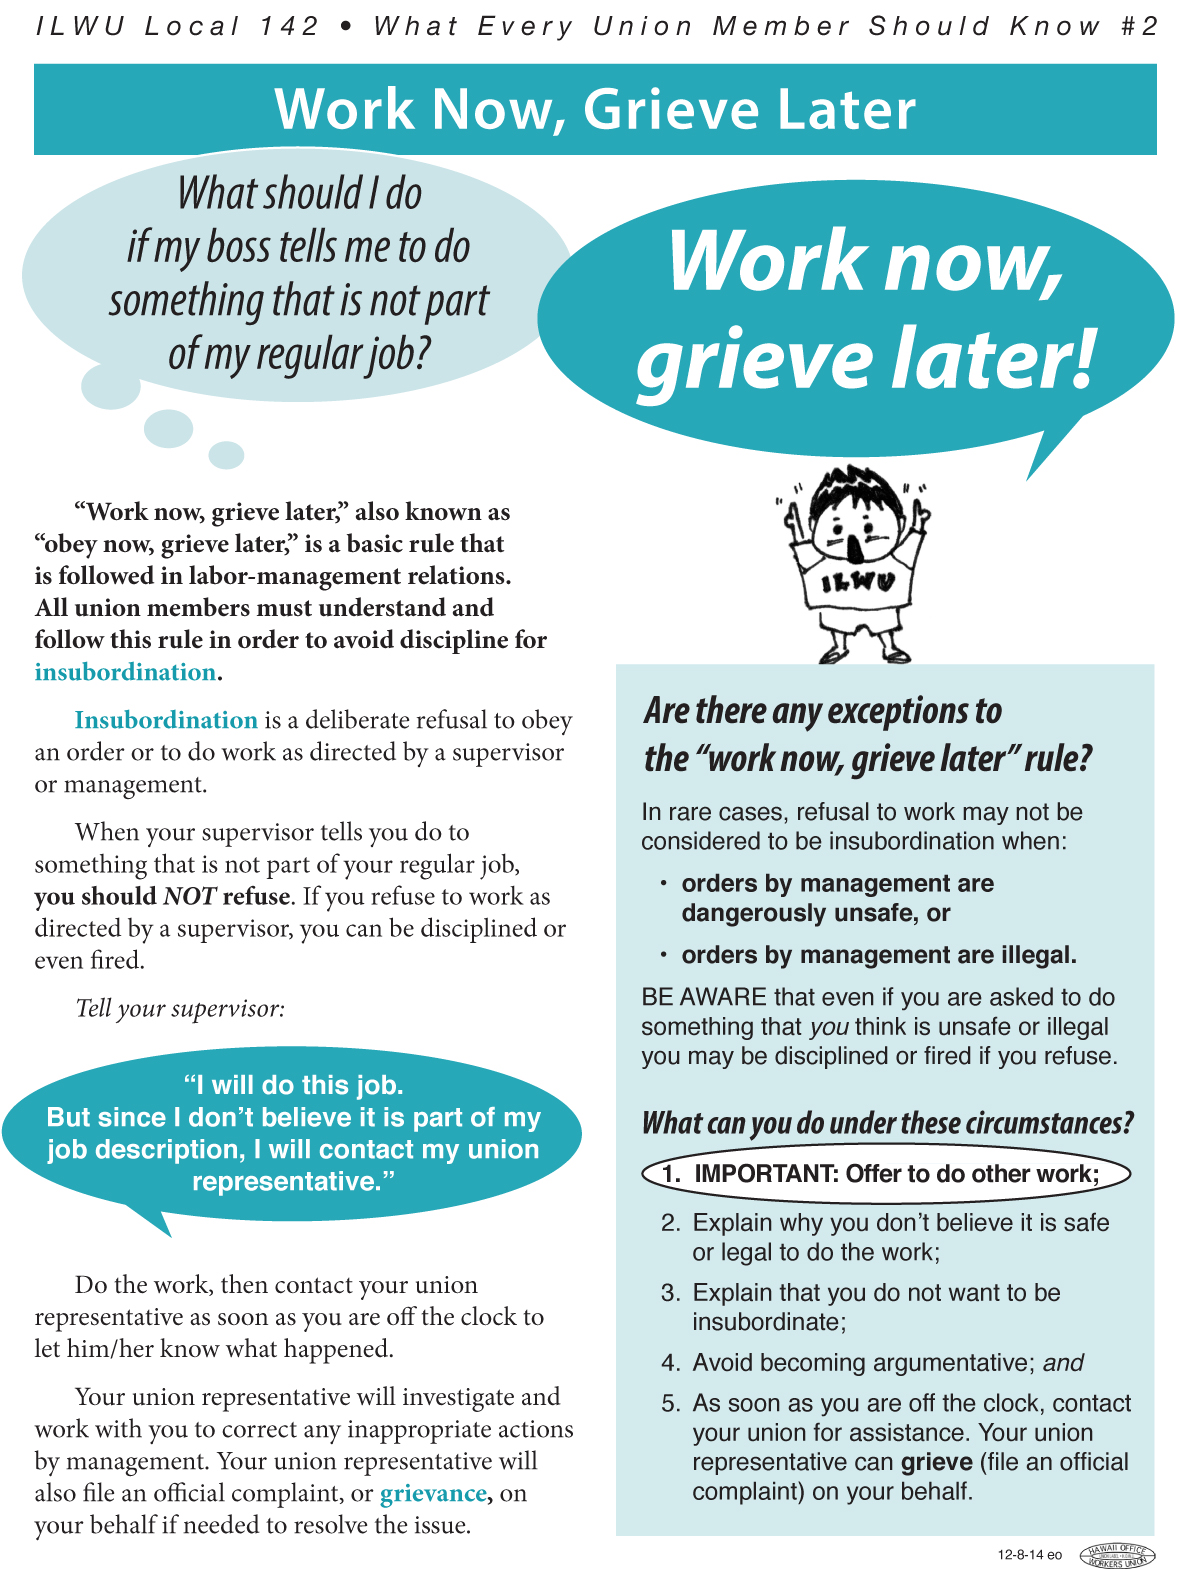 What Every Union Member Should Know Poster #2: WORK NOW, GRIEVE LATER